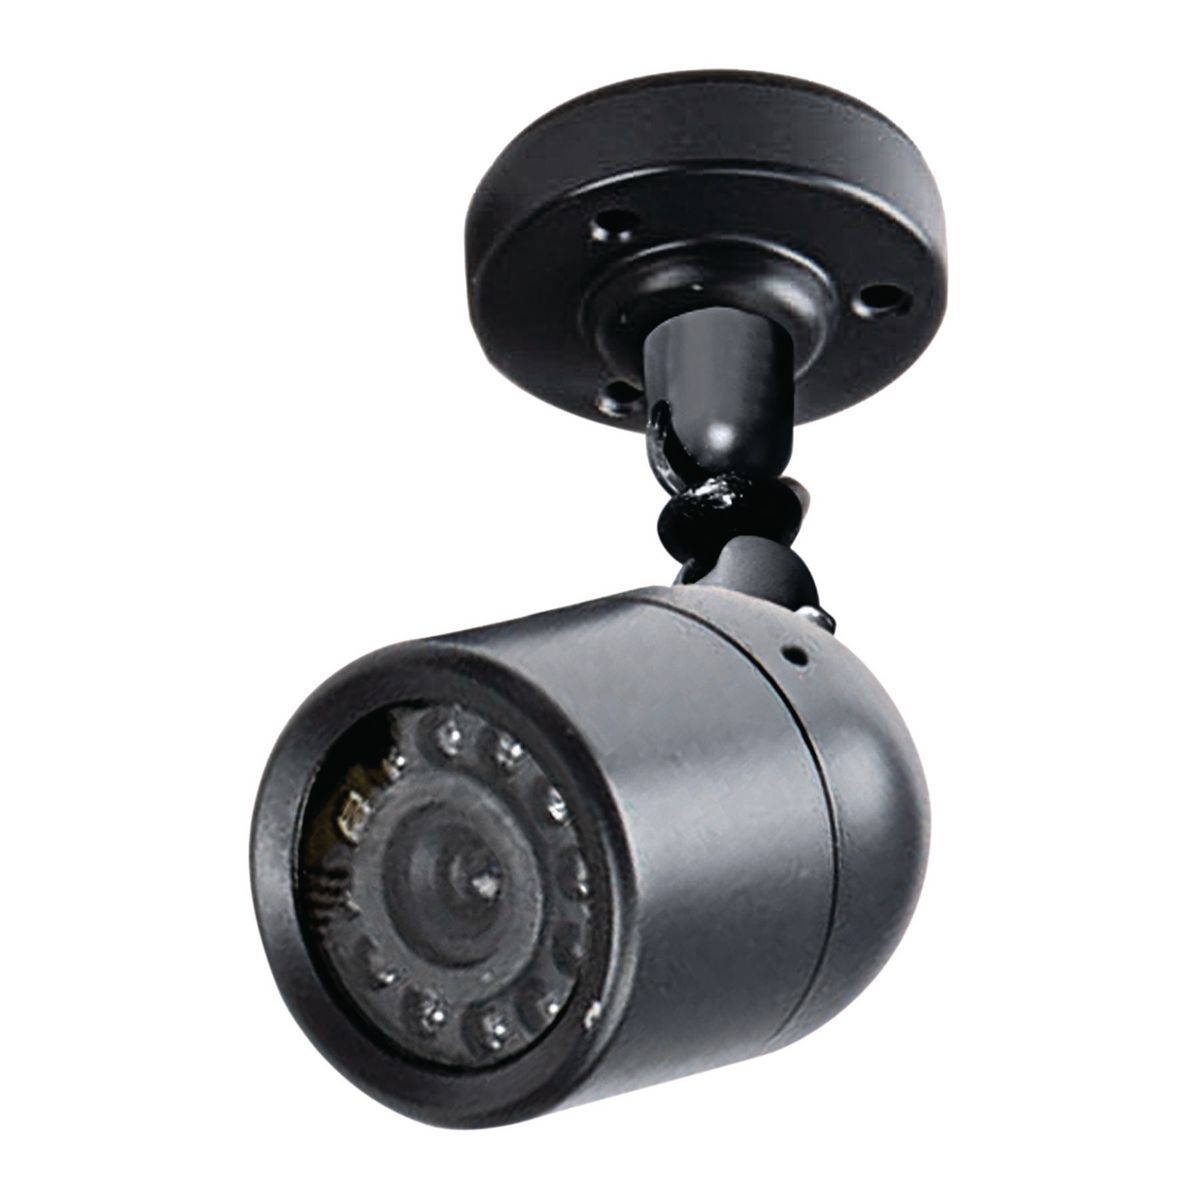 Weatherproof Color Security Camera with Night Vision